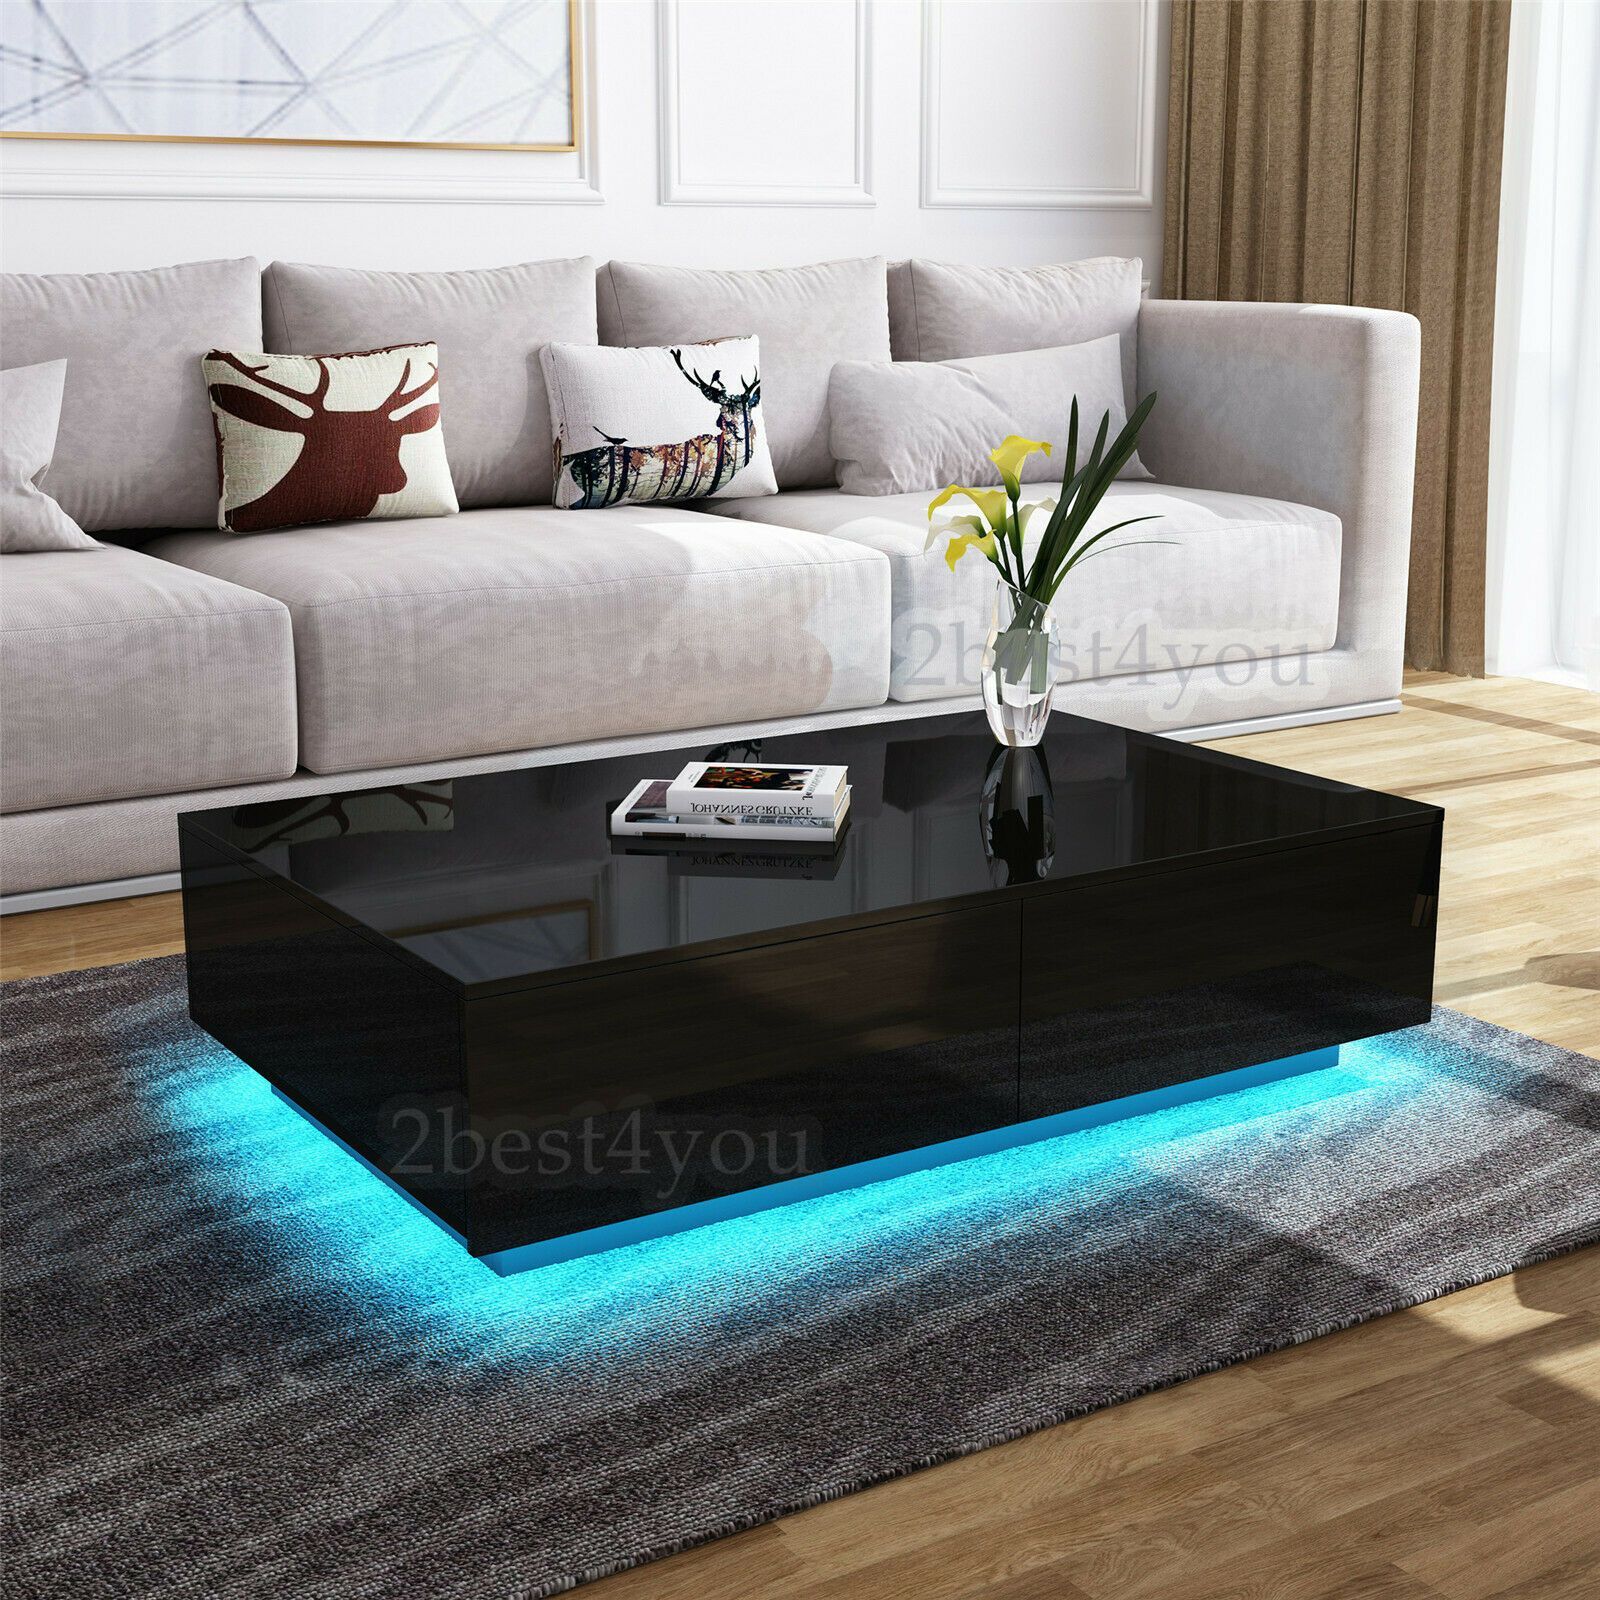 Modern Coffee Table With Led Lights – Stellabracy In Rectangular Led Coffee Tables (Gallery 9 of 20)